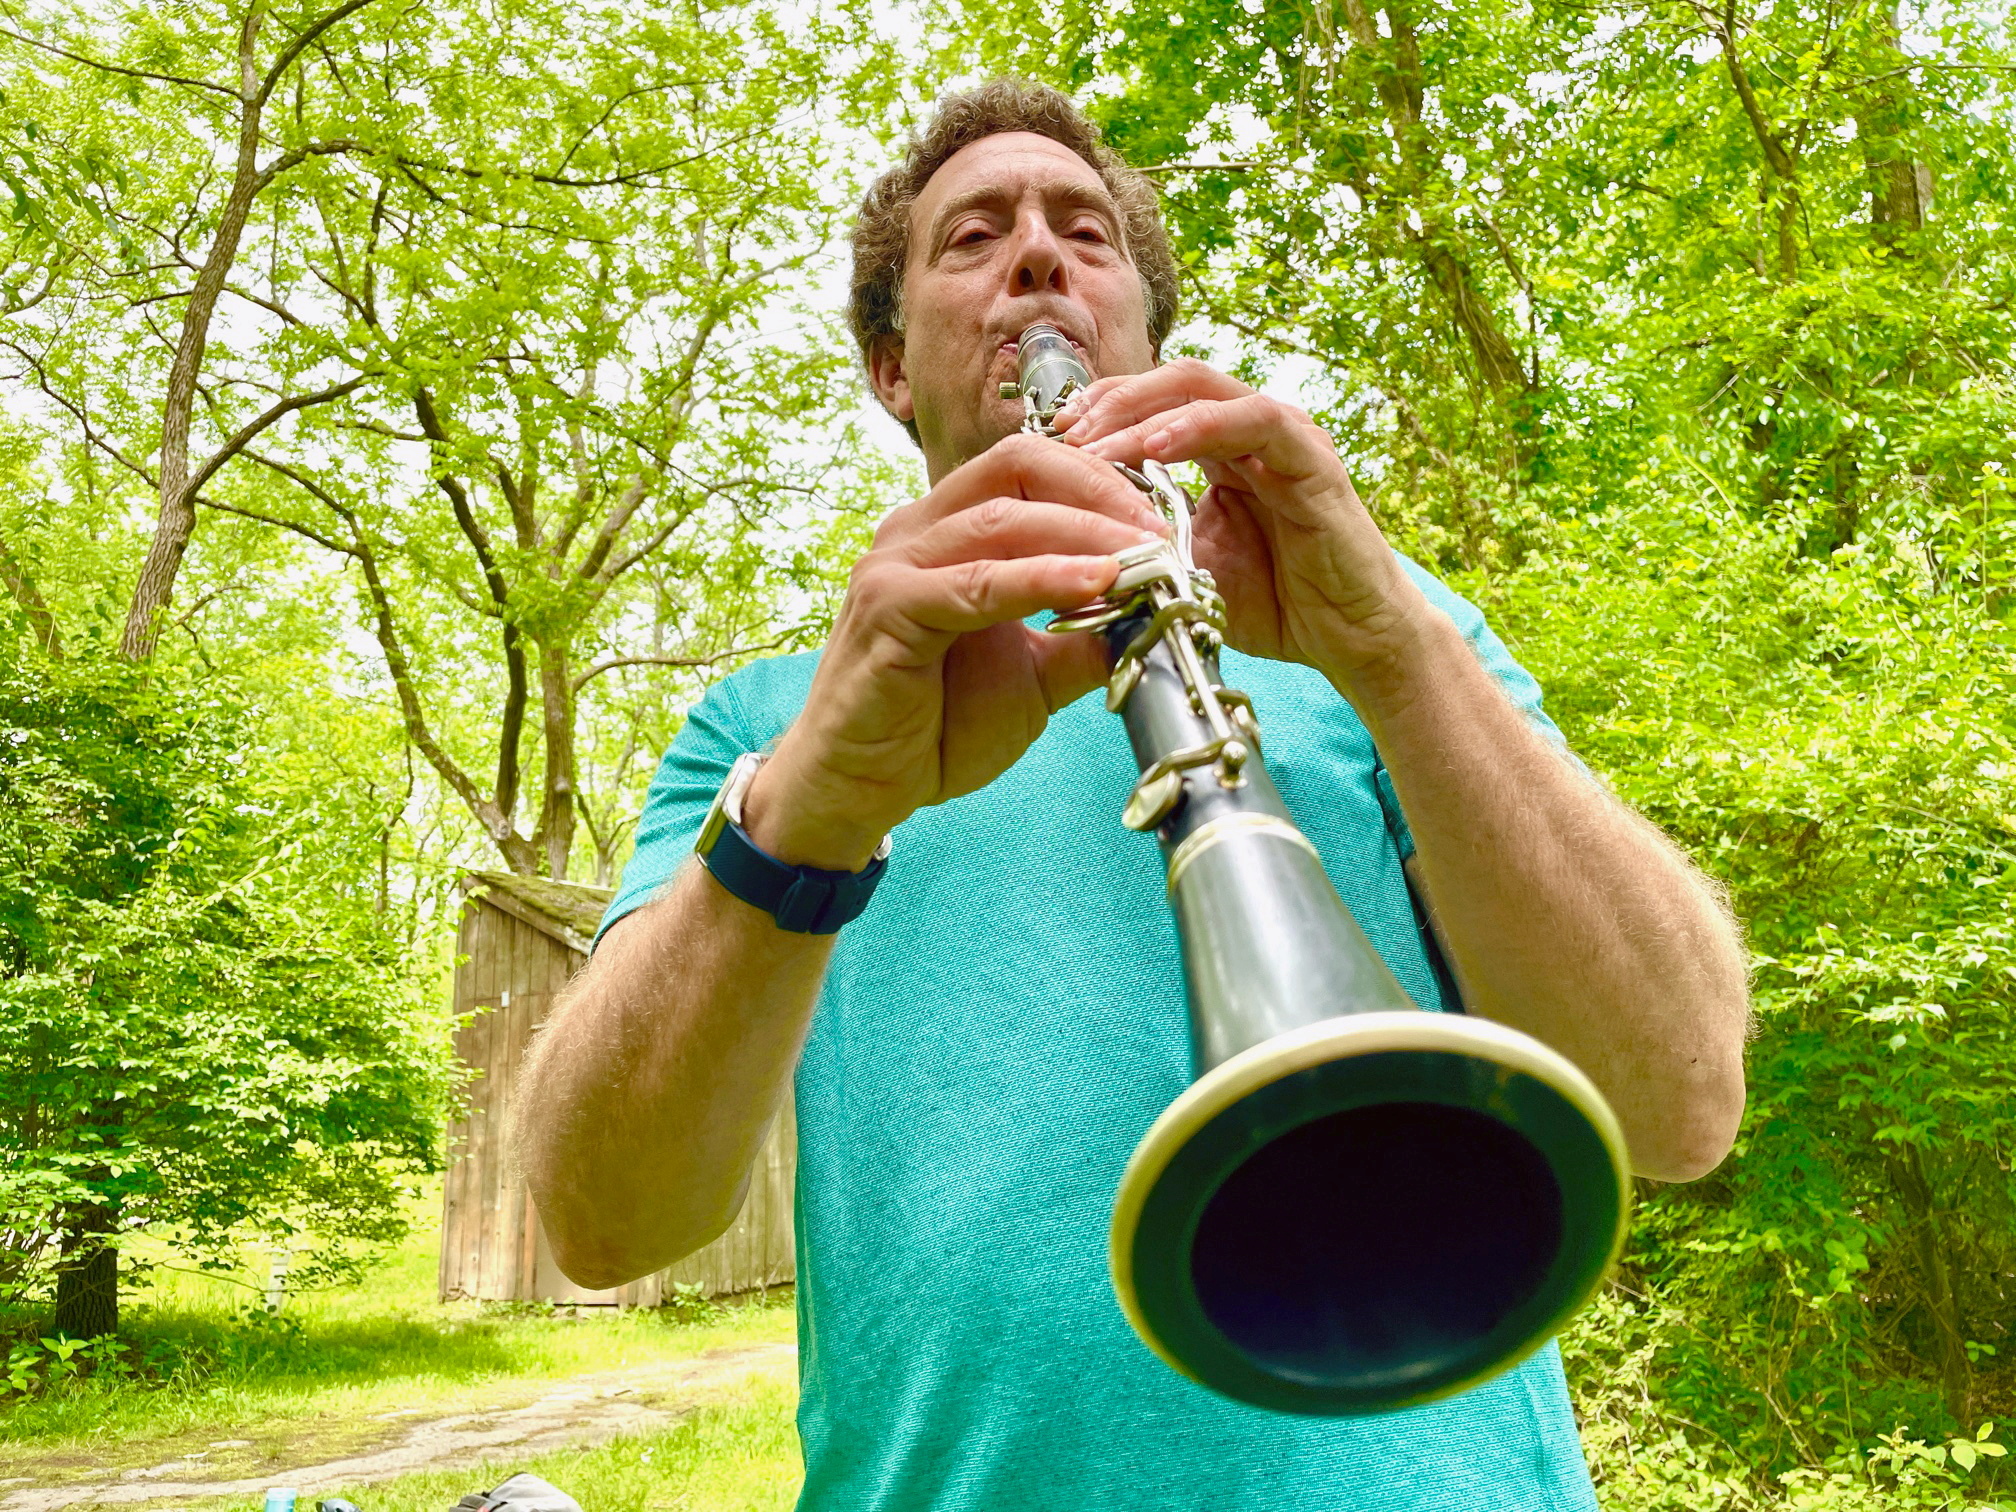 David Rothenberg, a professor of philosophy and music at the New Jersey Institute of Technology, plays the clarinet along with the sounds of cicadas